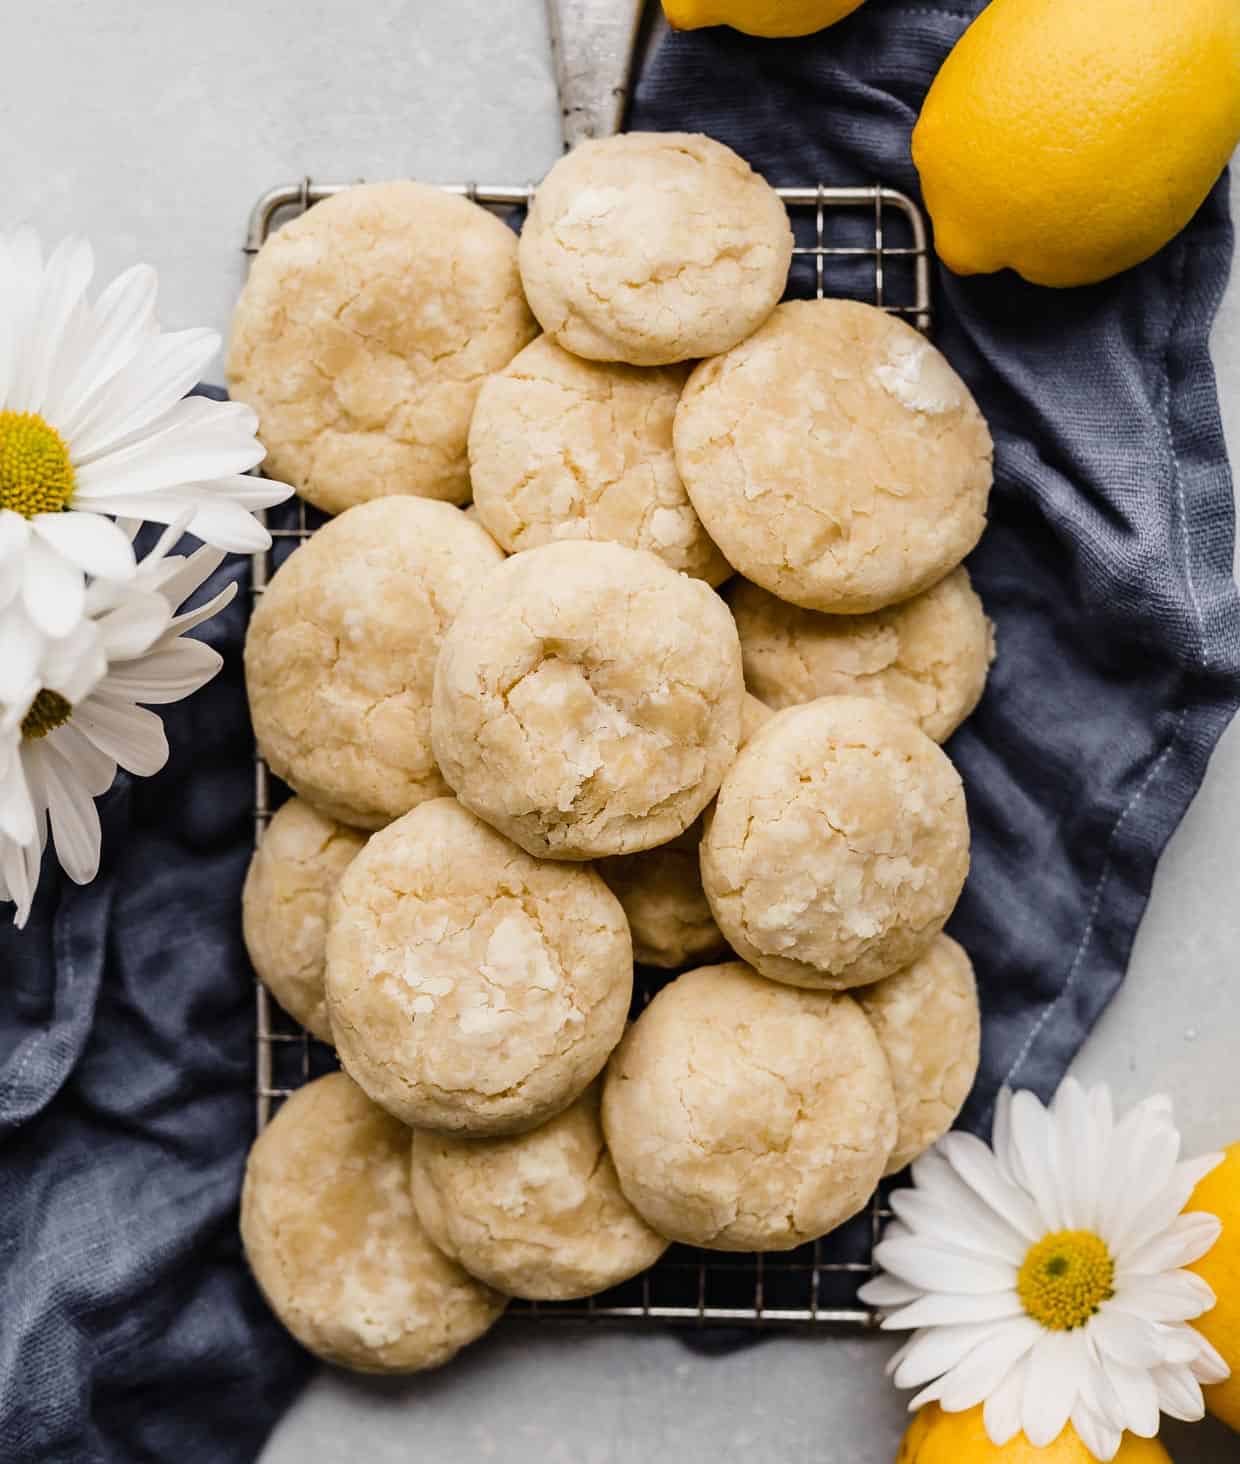 A stack of Lemon Cookies on a small wire rack that is resting on a dark blue linen napkin with two daisy flowers near the cookies.